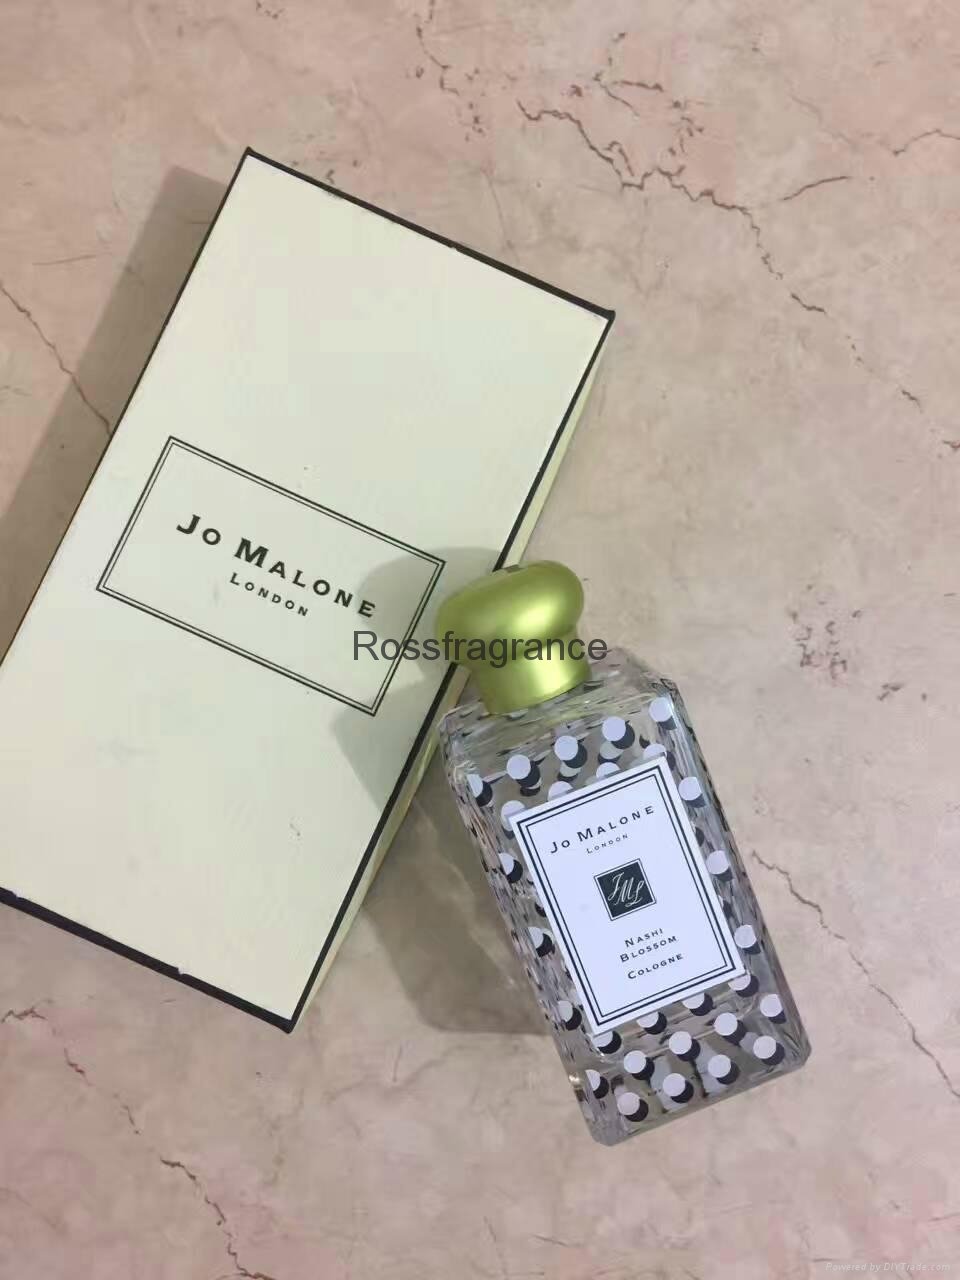 Best quality wholesale low price Jo malone perfume good cologne 11